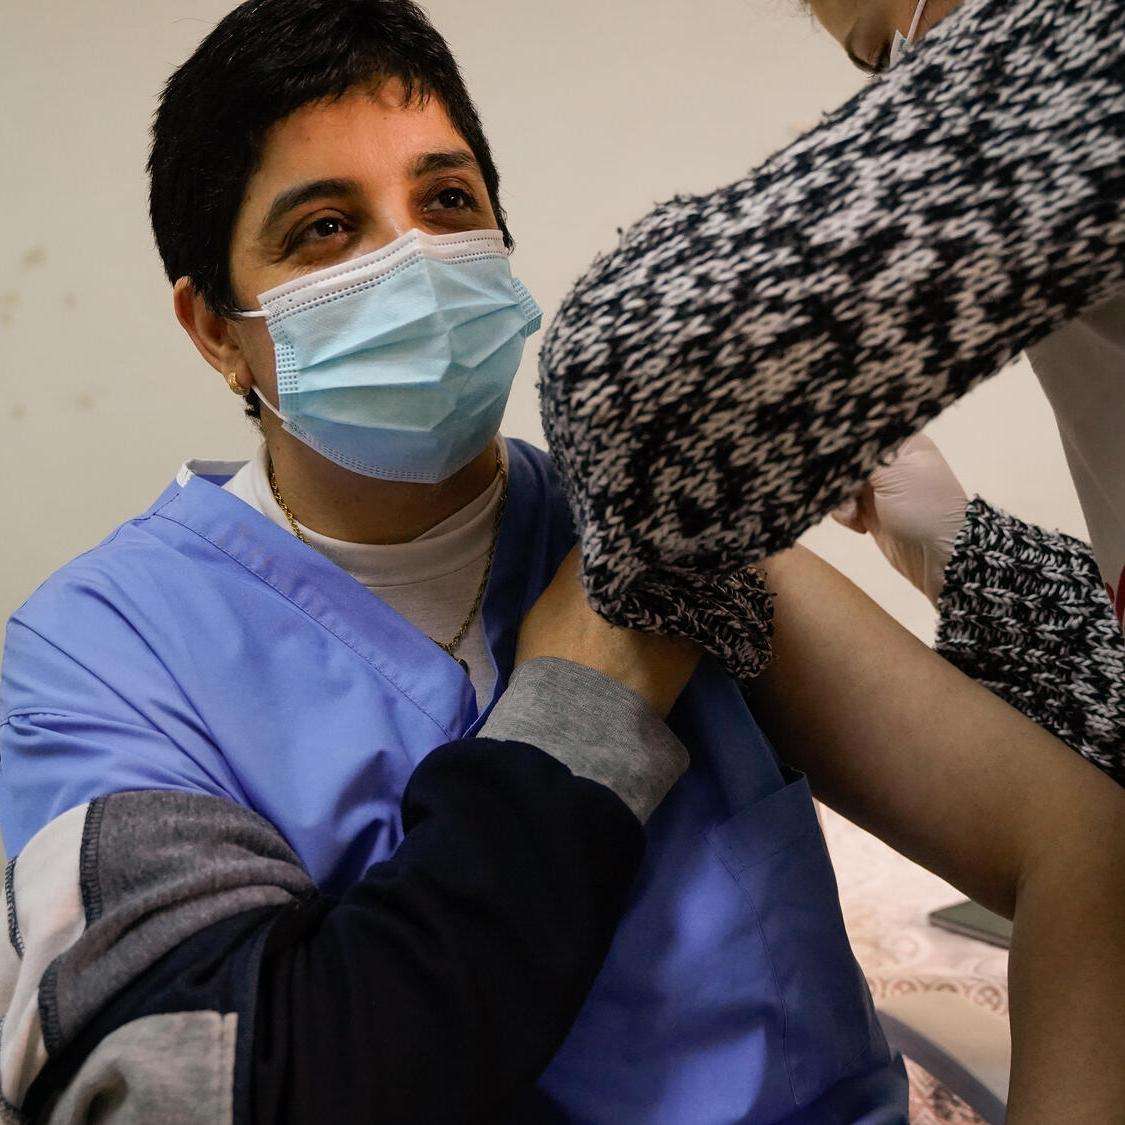 MSF medical mobile team member vaccinates a patient in northern Lebanese city of Tripoli.